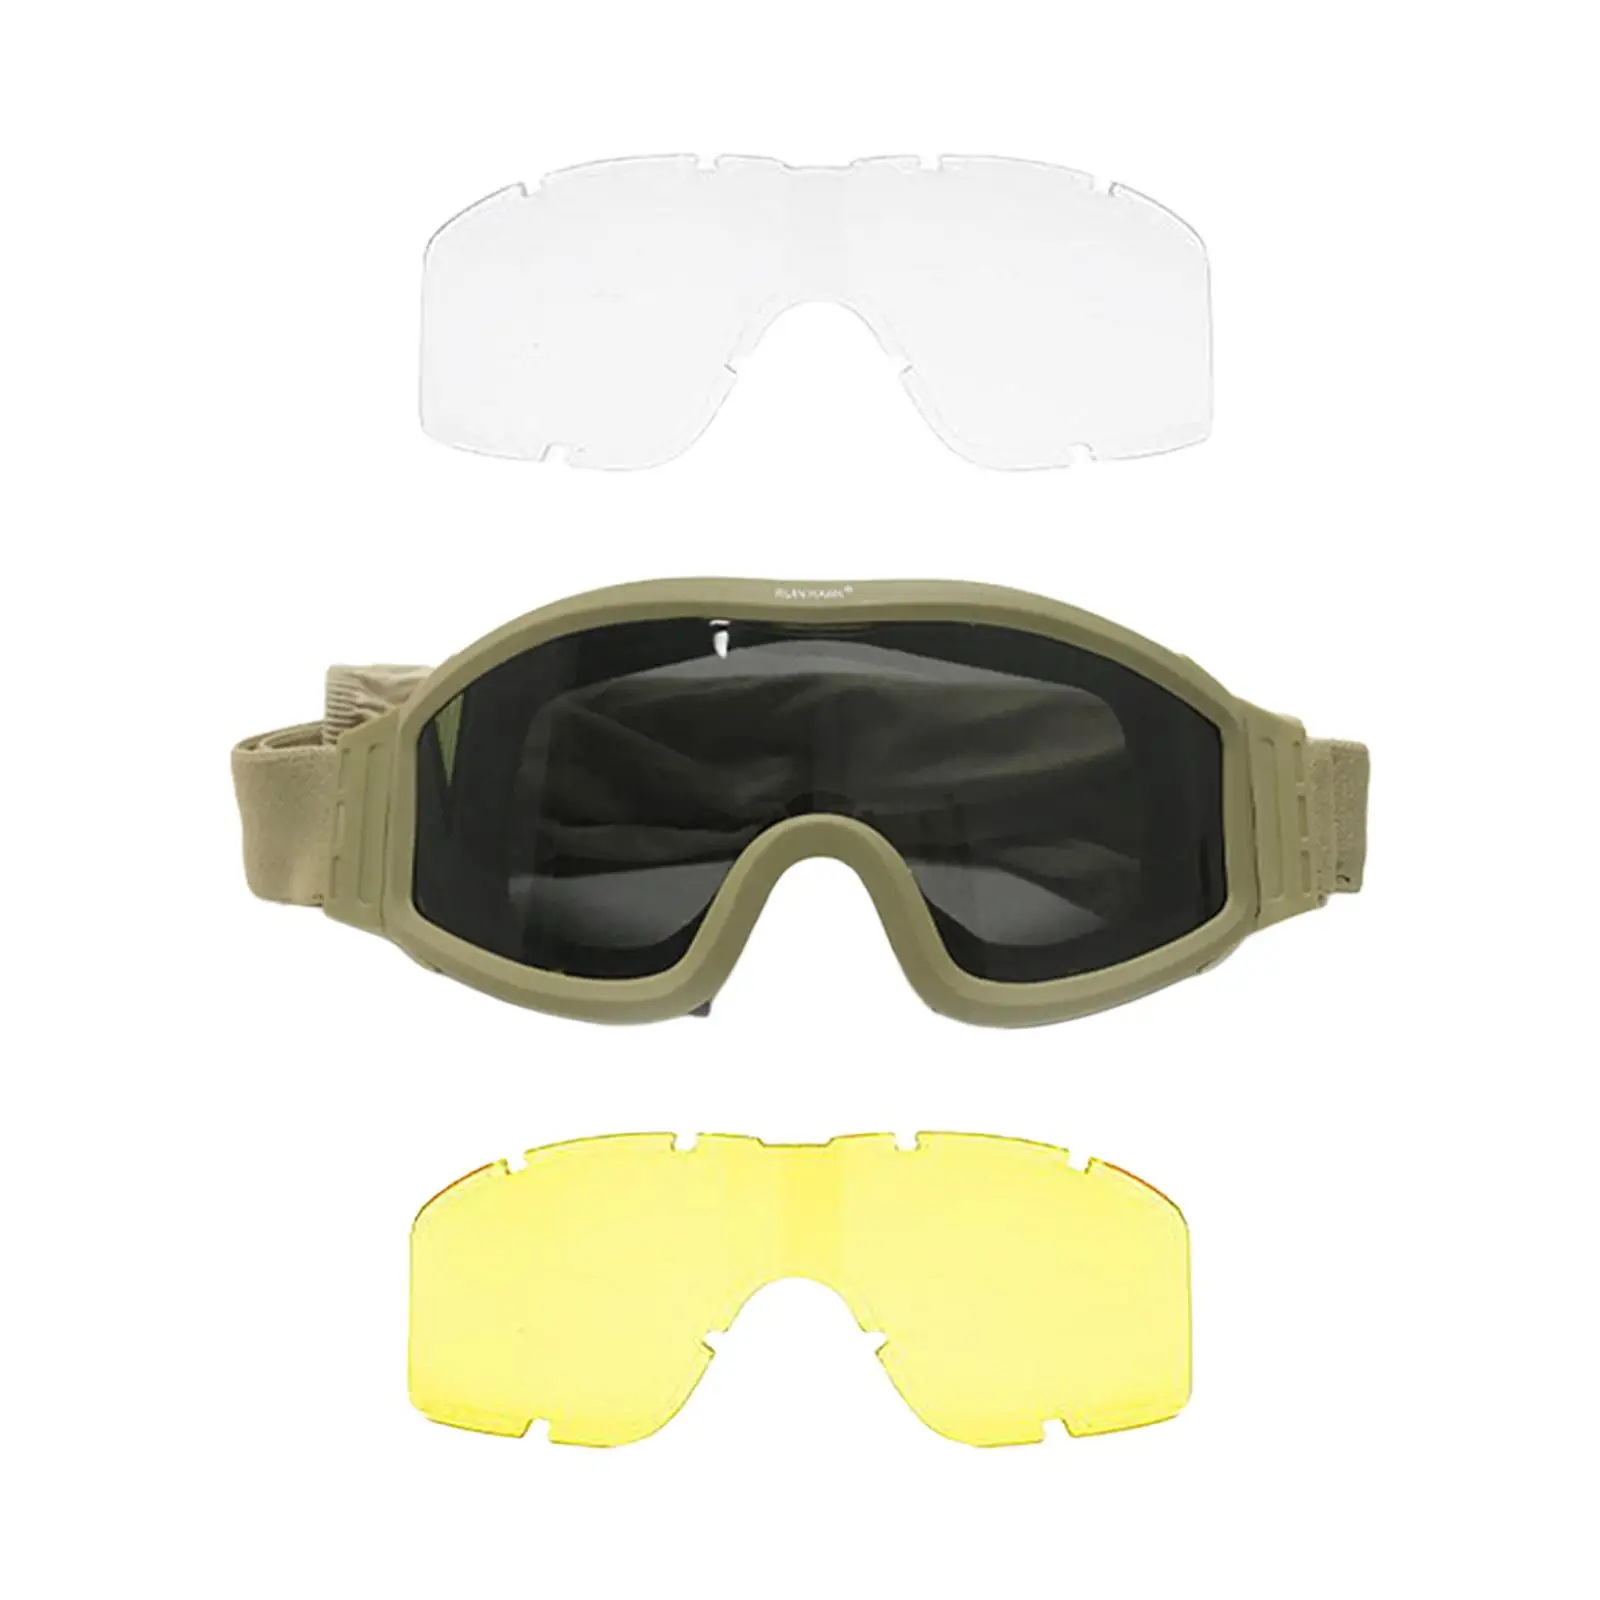 Black Transparent Yellow Goggles Glasses Adjustable for Cycling Shooting